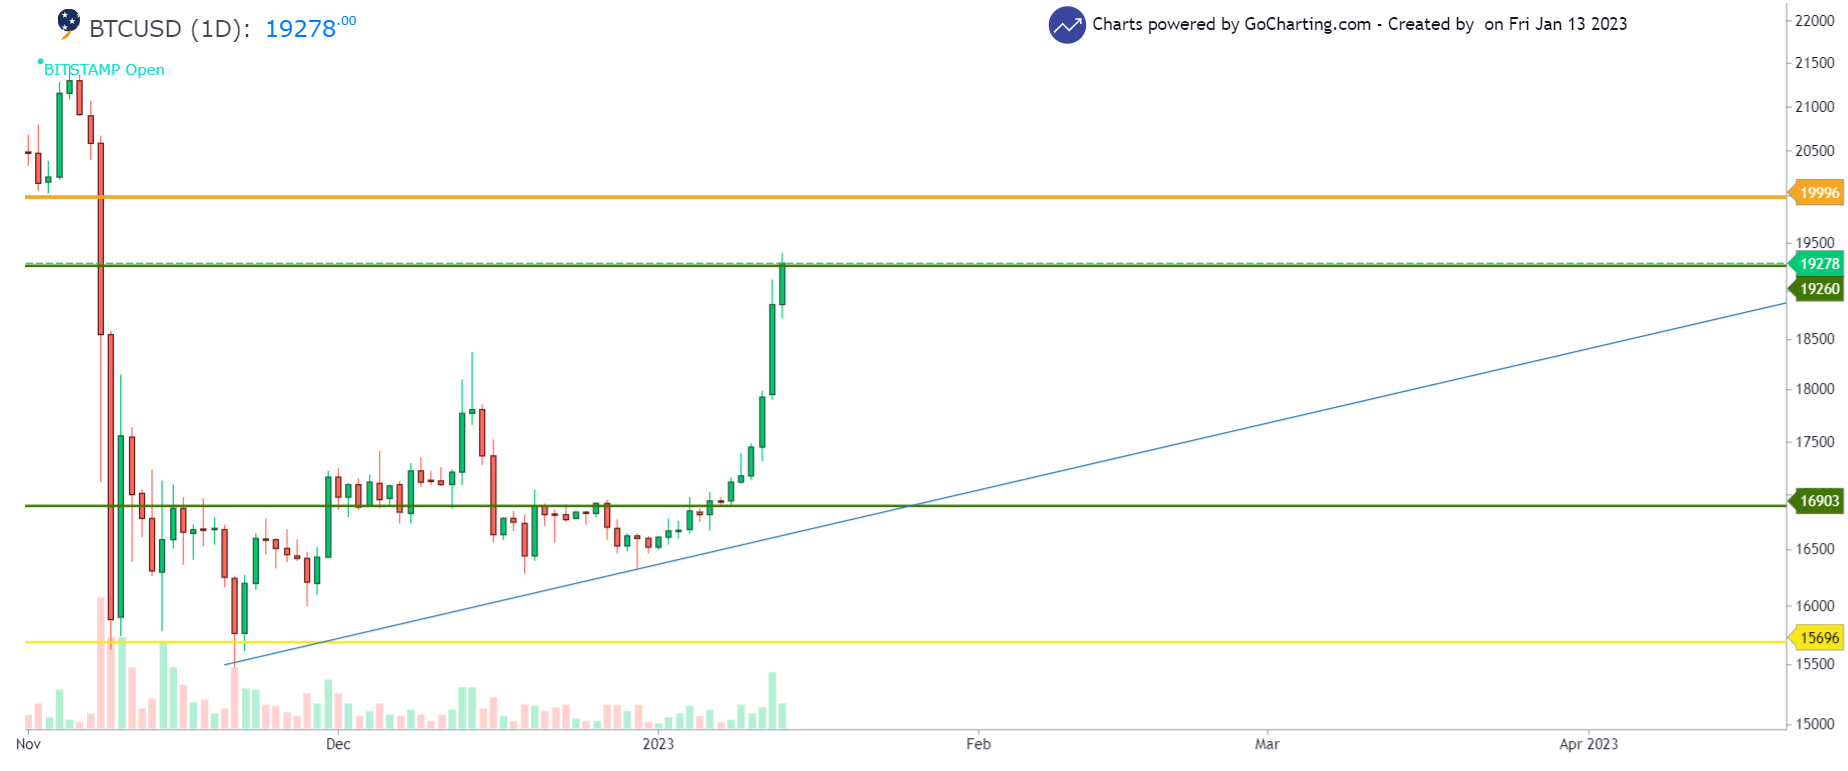 BTC/USD 1-day chart showing the uptrend in Bitcoin prices 